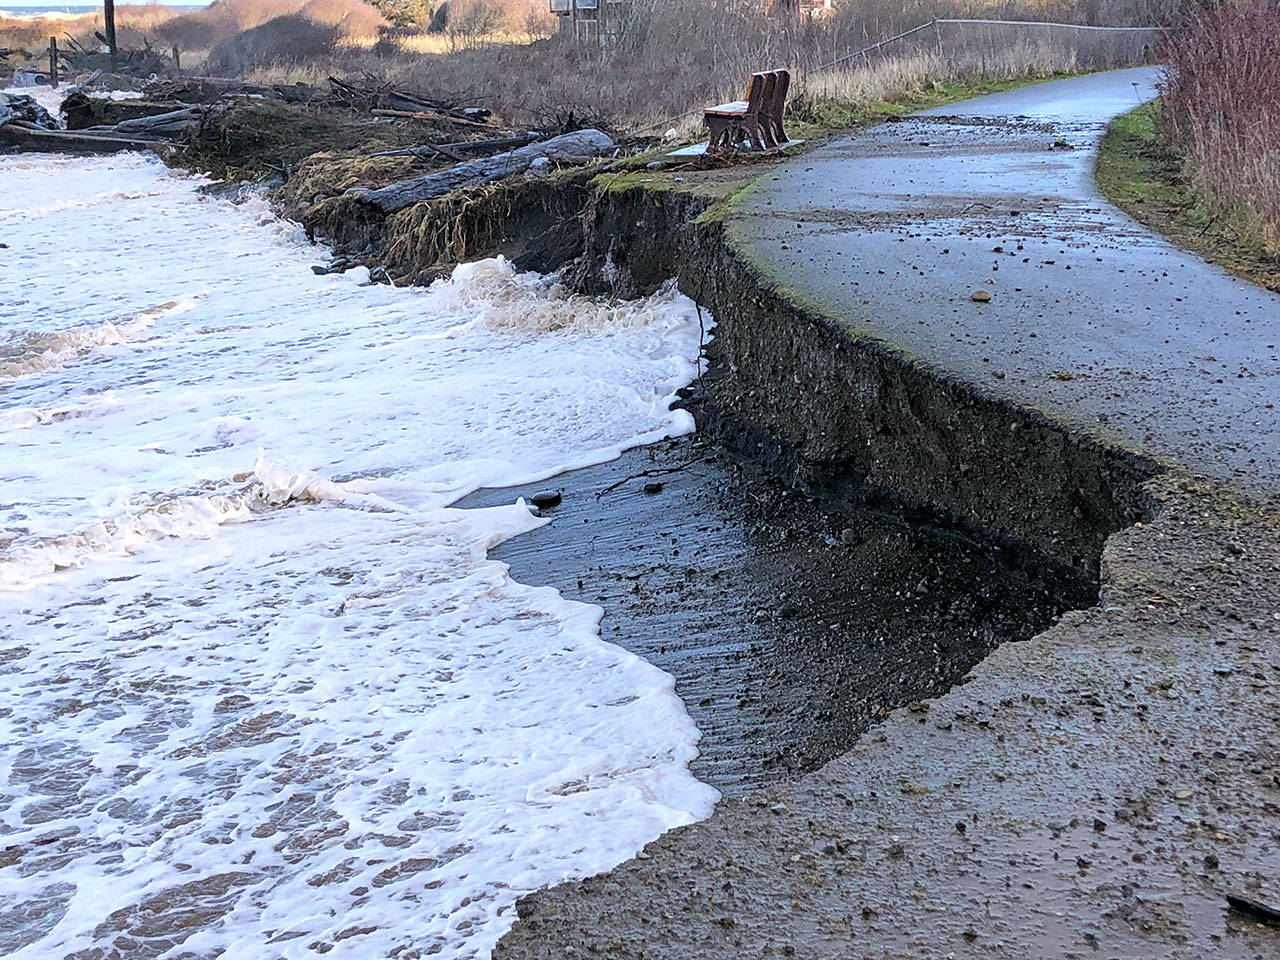 Erosion is threatening a section of the Olympic Discovery Trail near Four Seasons Ranch, west of Port Angeles, as seen in this Jan. 12, 2020, photo. (Mark Swanson)